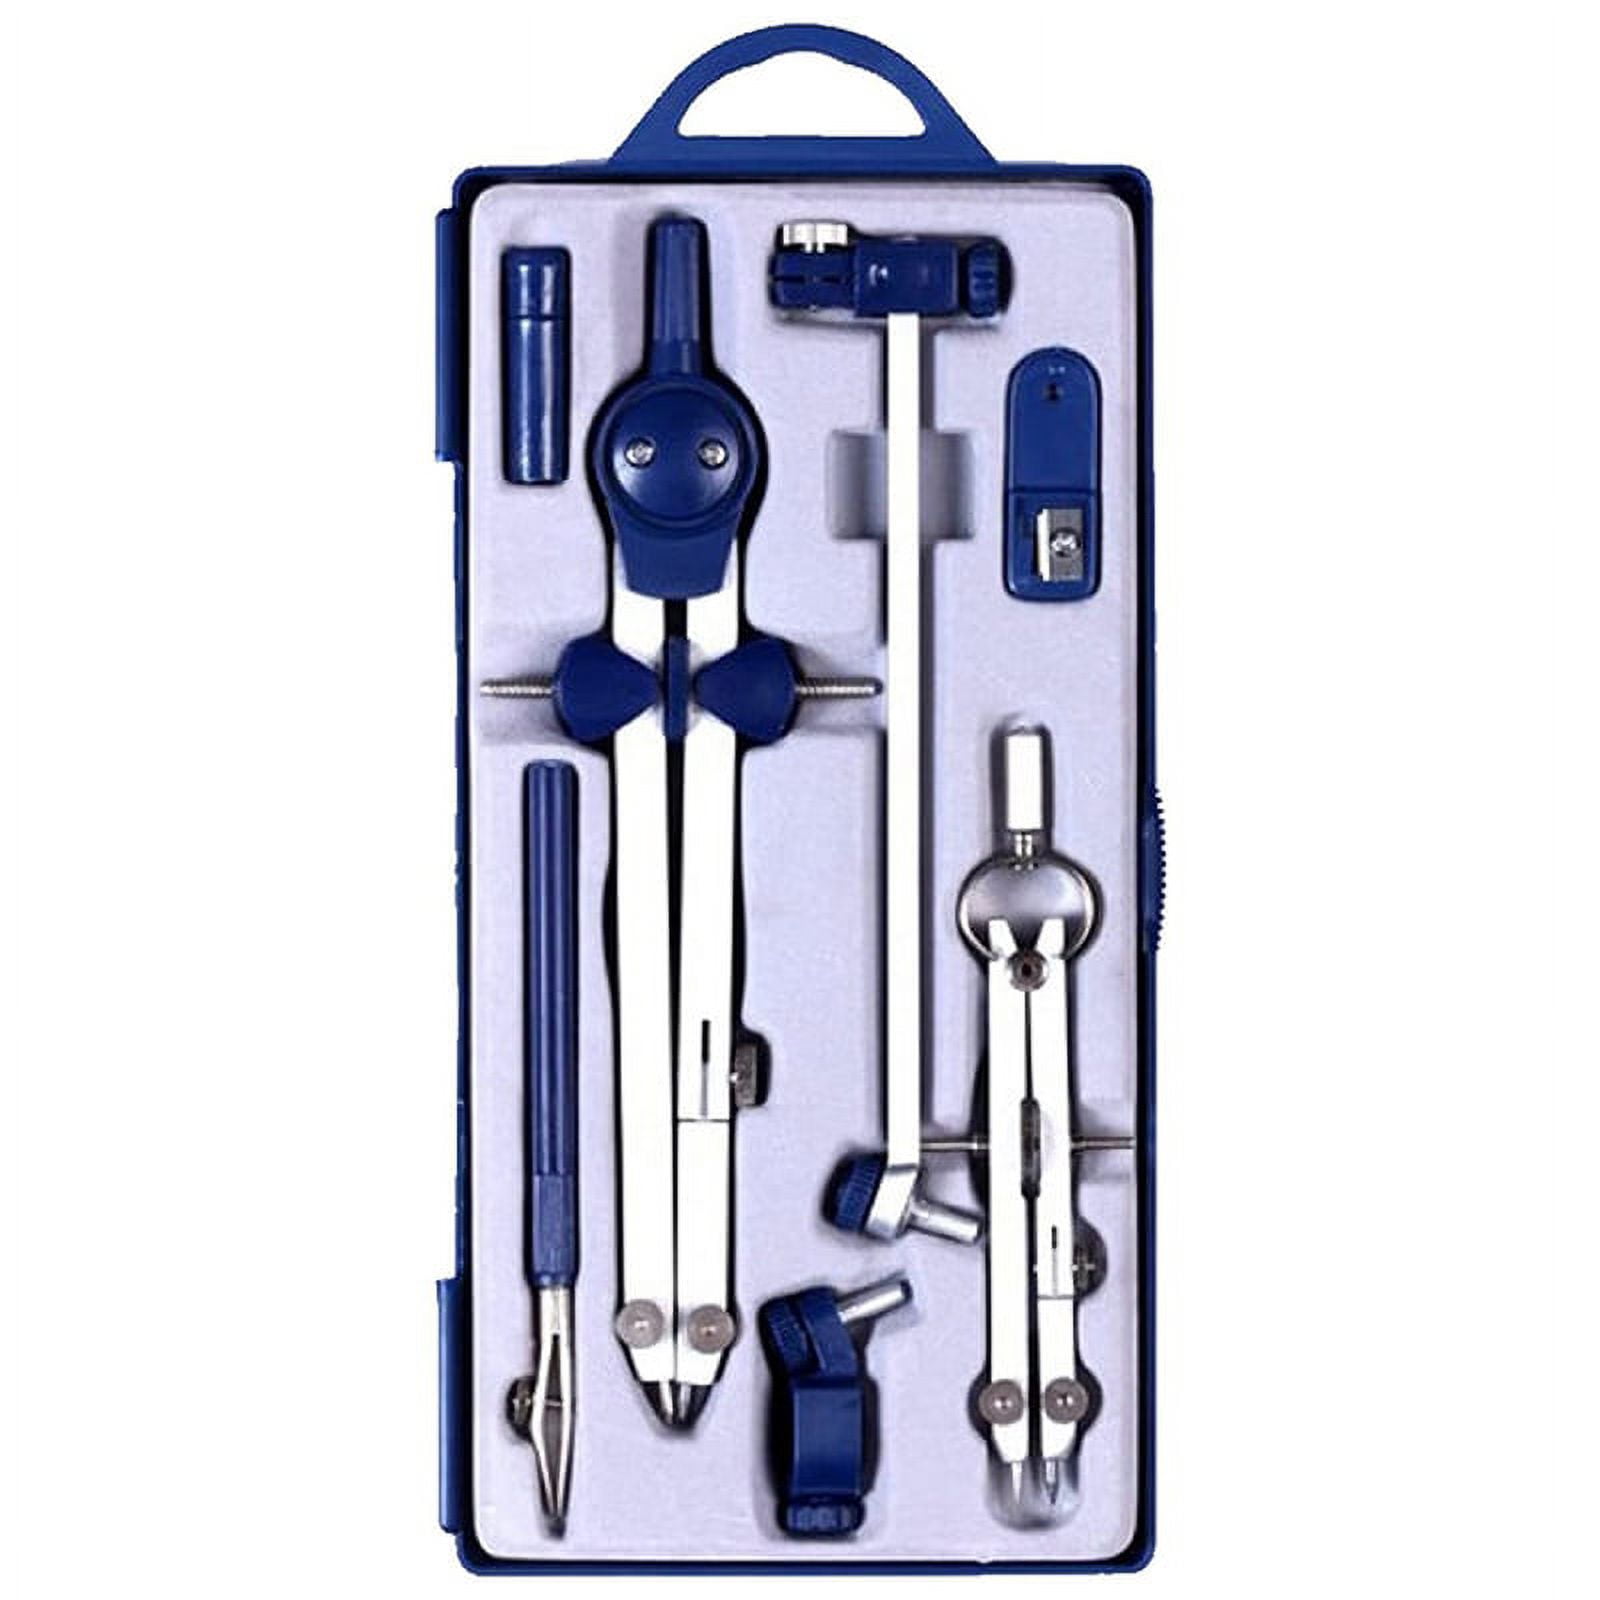 Drawing Tools & Drafting Kits Heavy Geometry for Compass 14pc Drafting Tools for Engineer Geometry Set Metal for Architecture Geometry Set for School